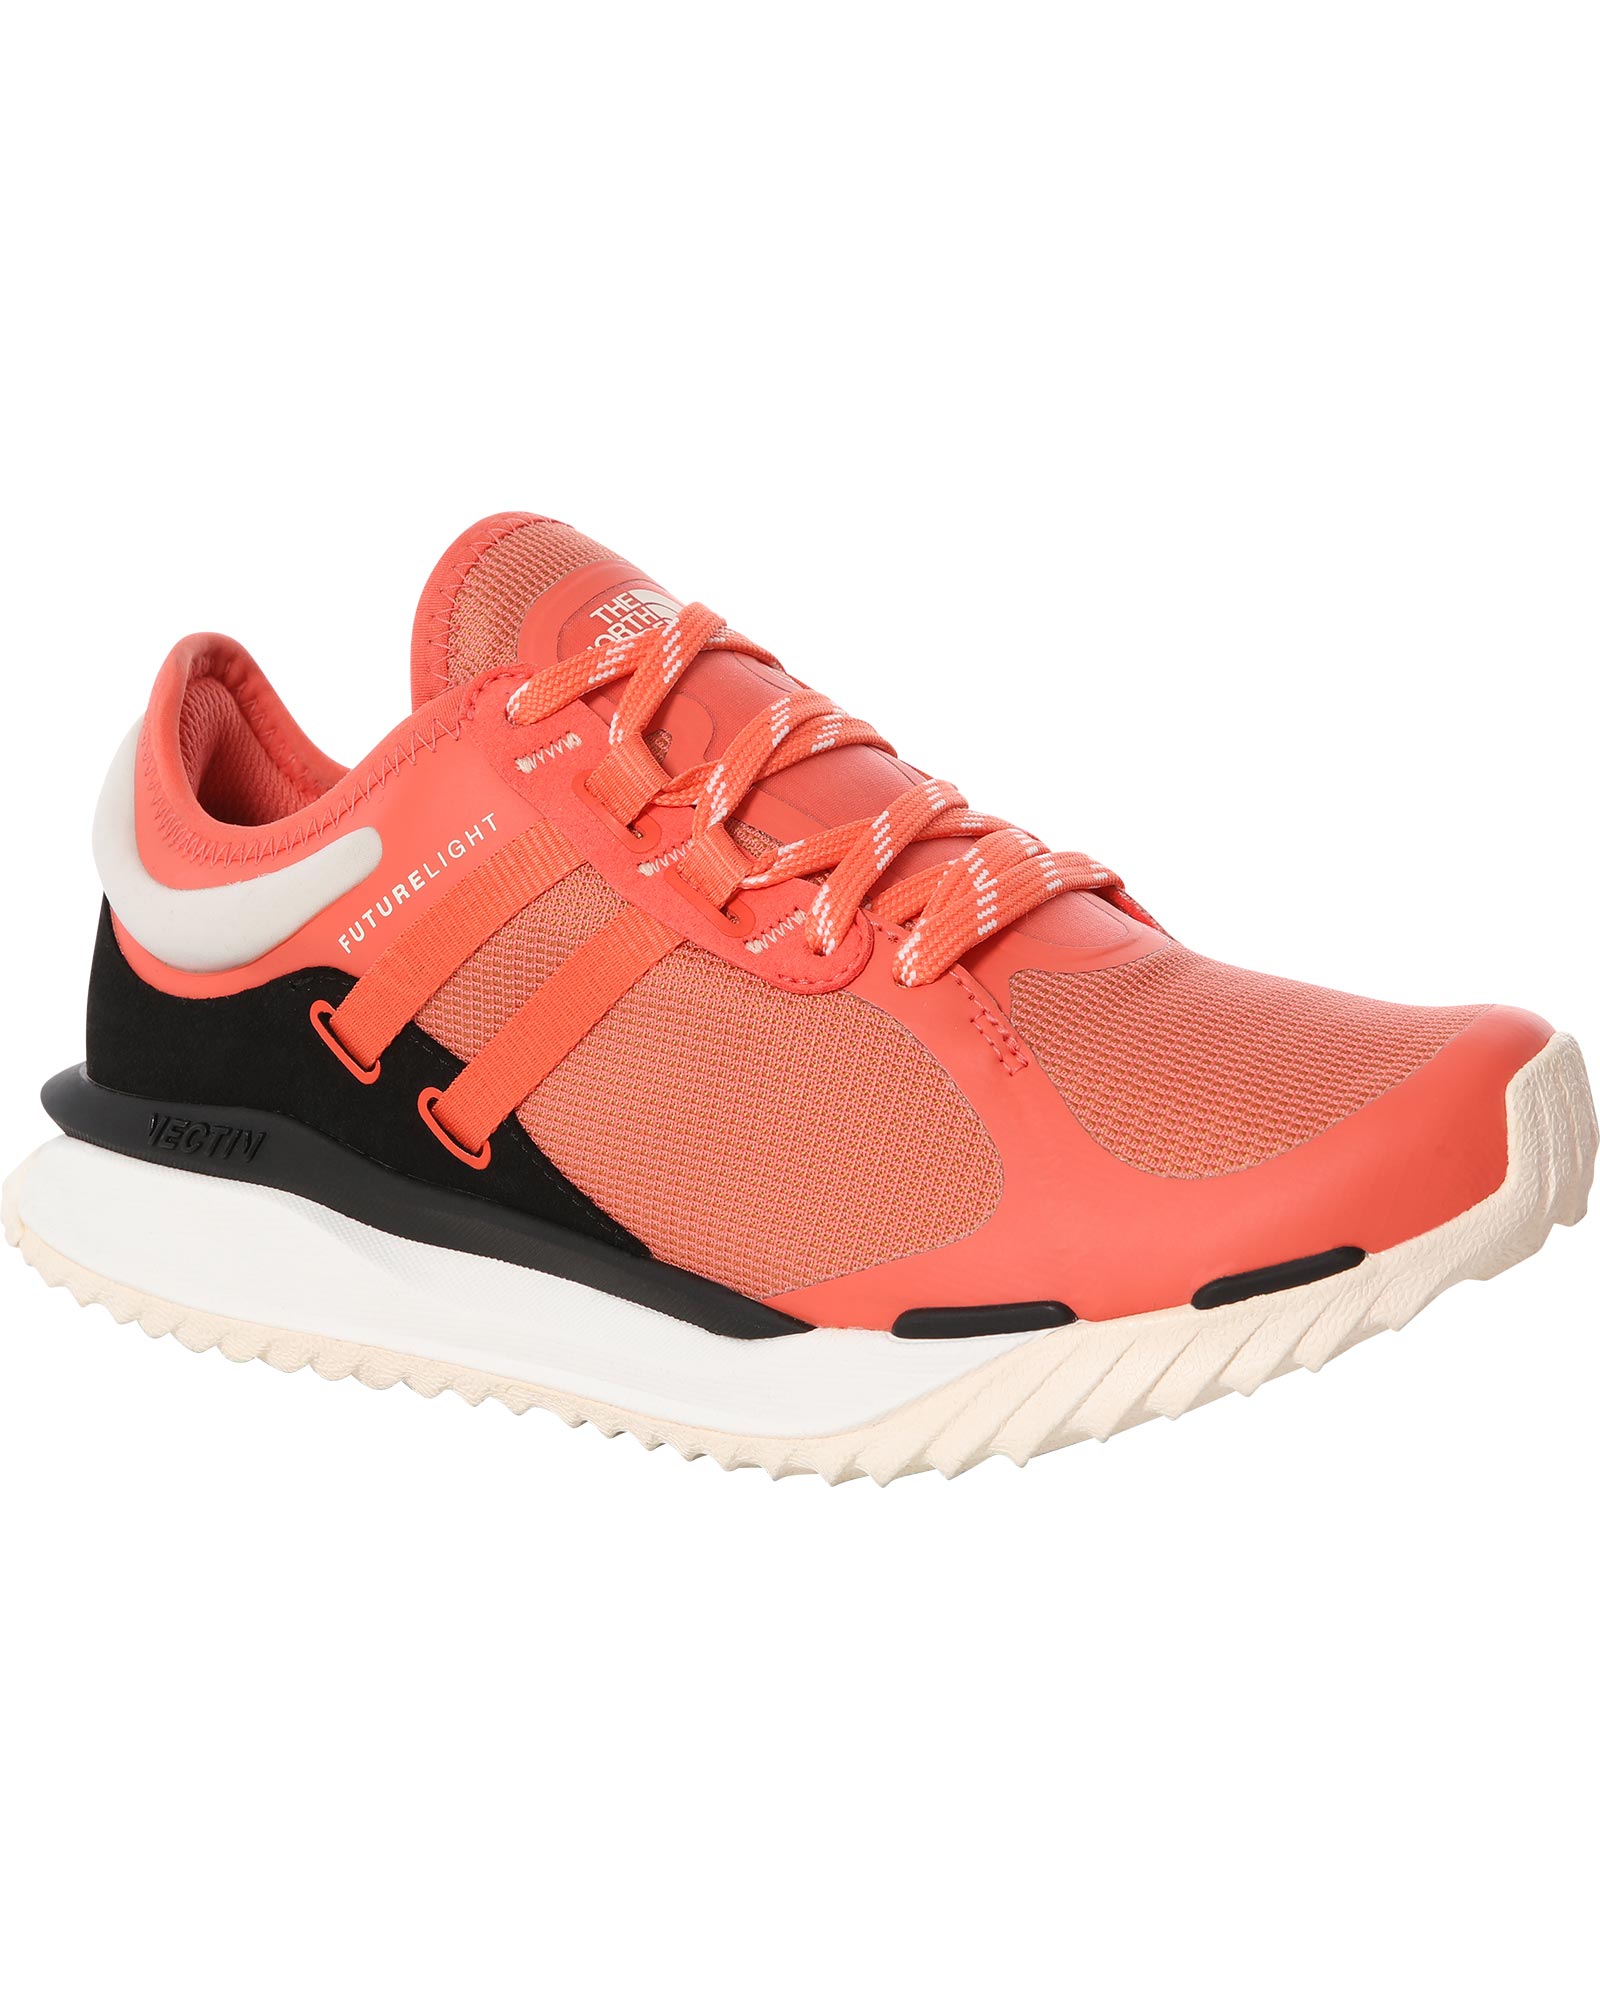 Product image of The North Face Vectiv escape FUTUReLIGHT Women's Shoes